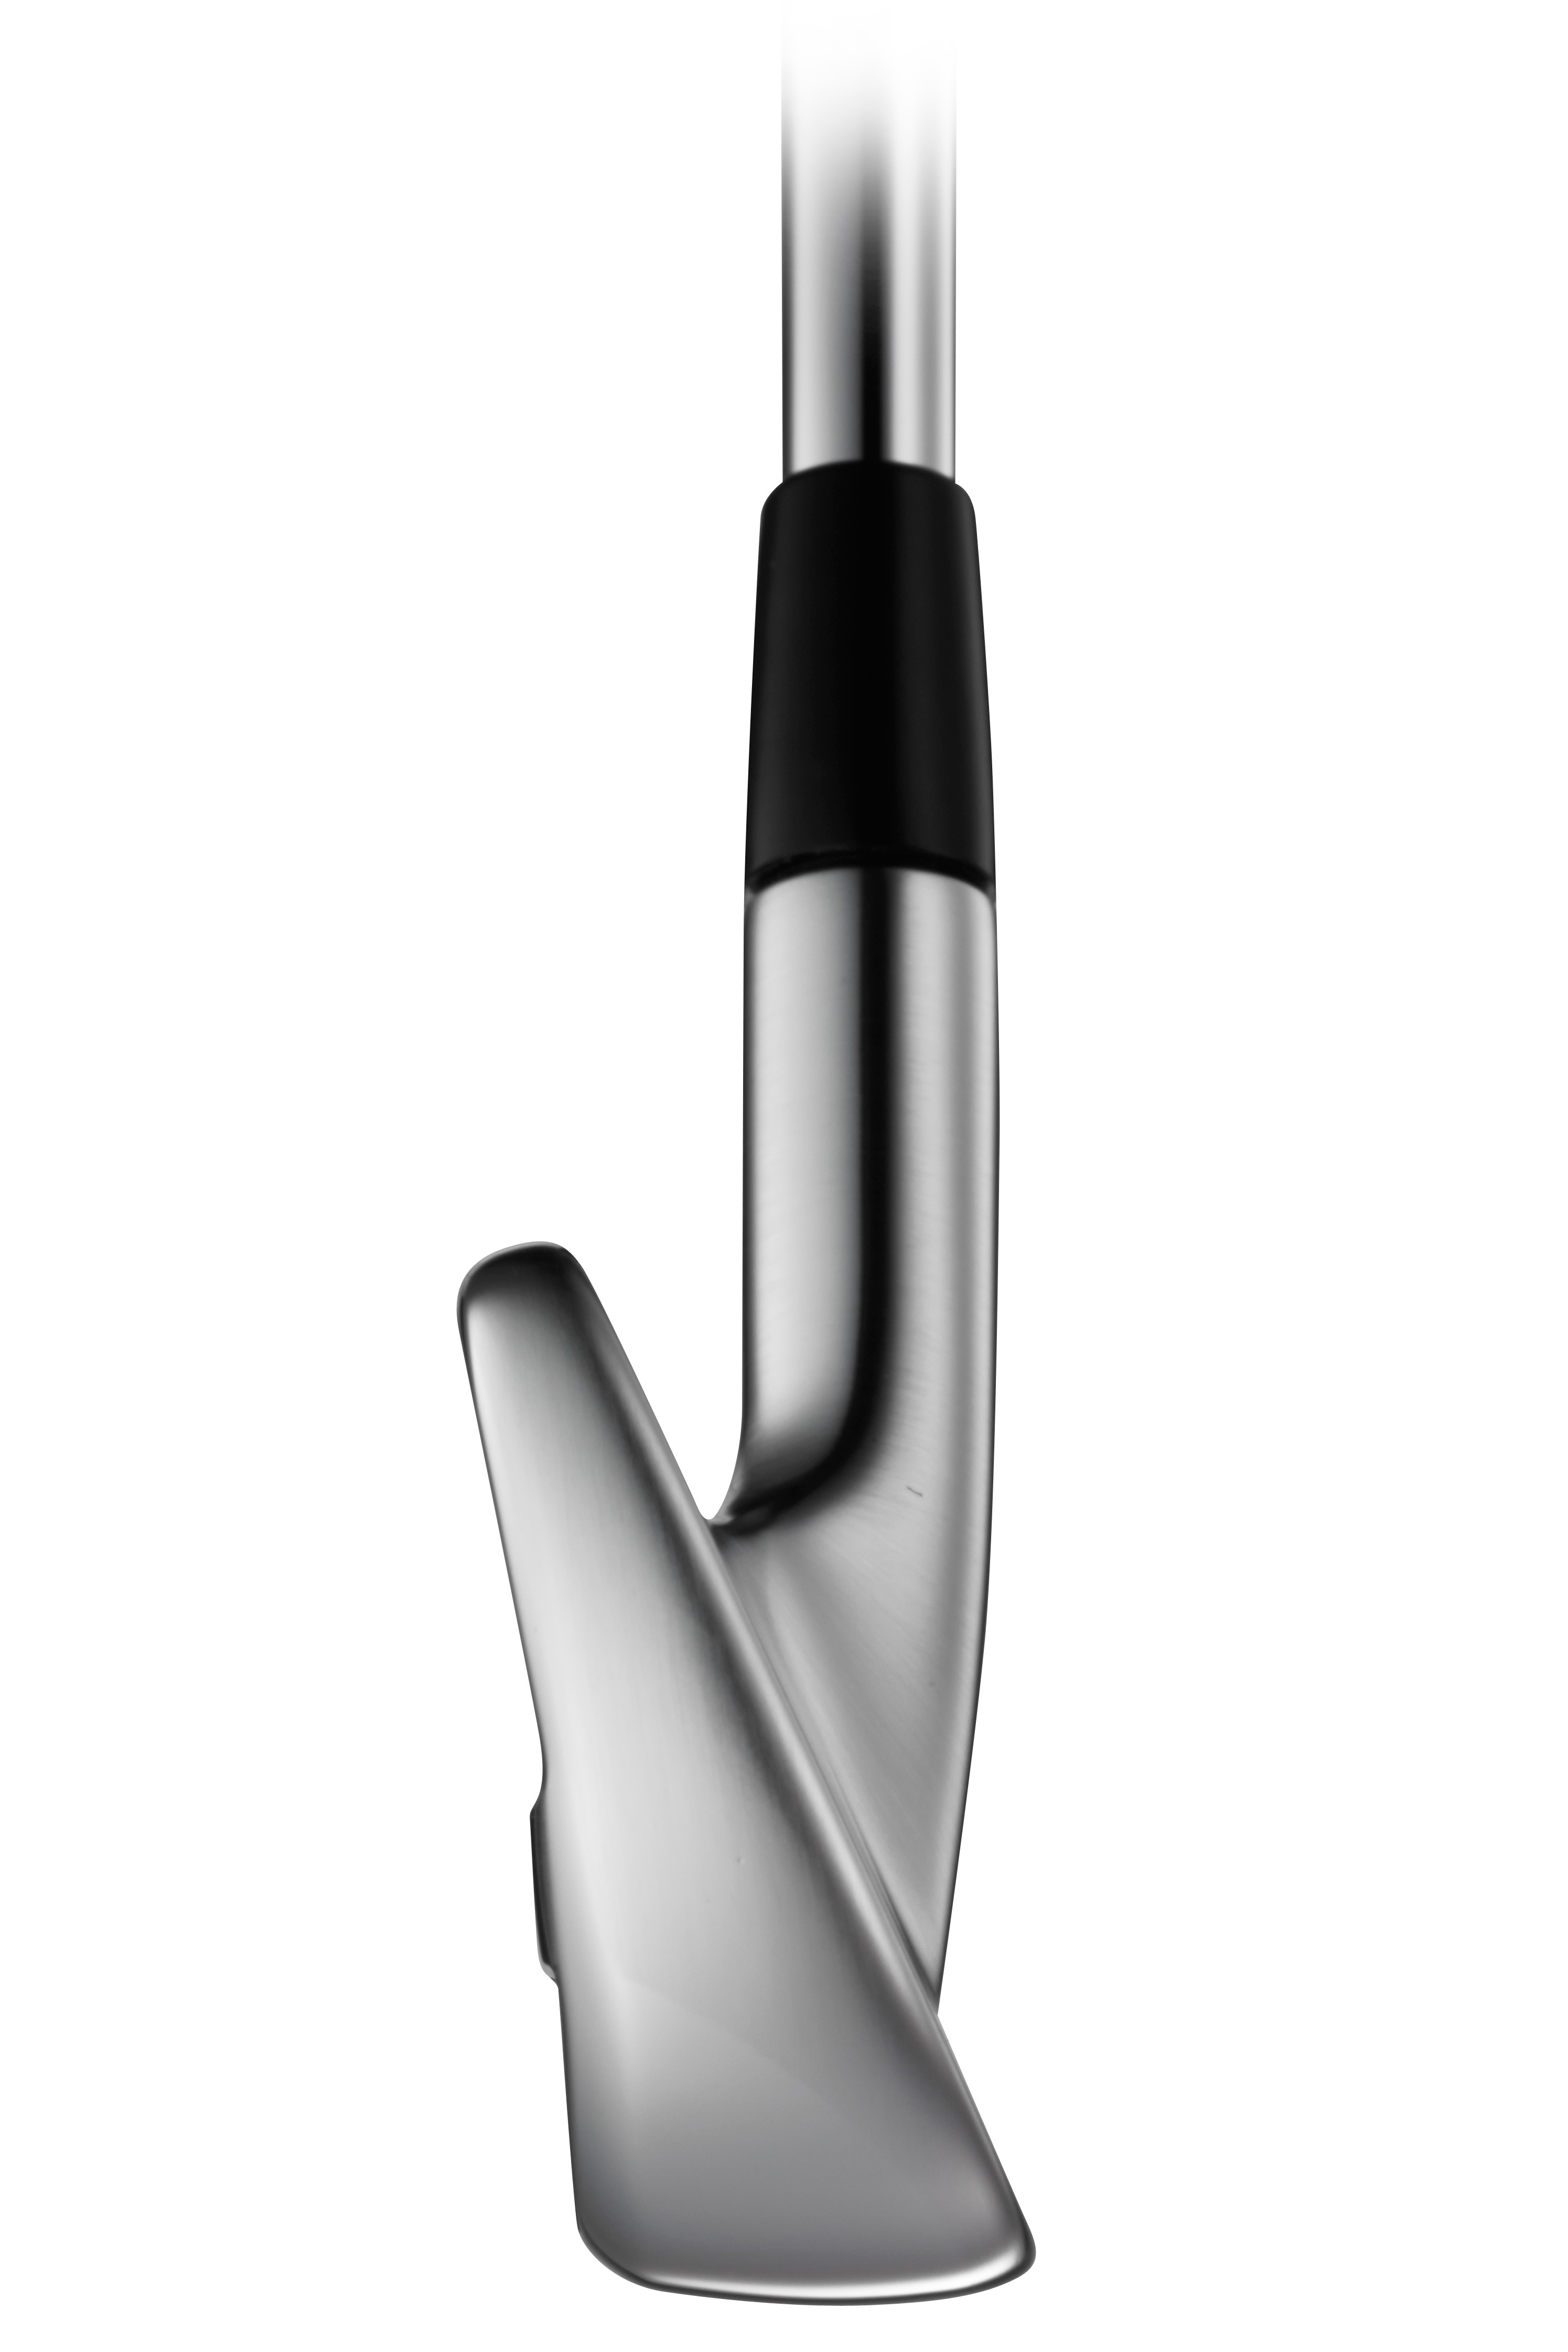 Thinner upper cavity face in long irons